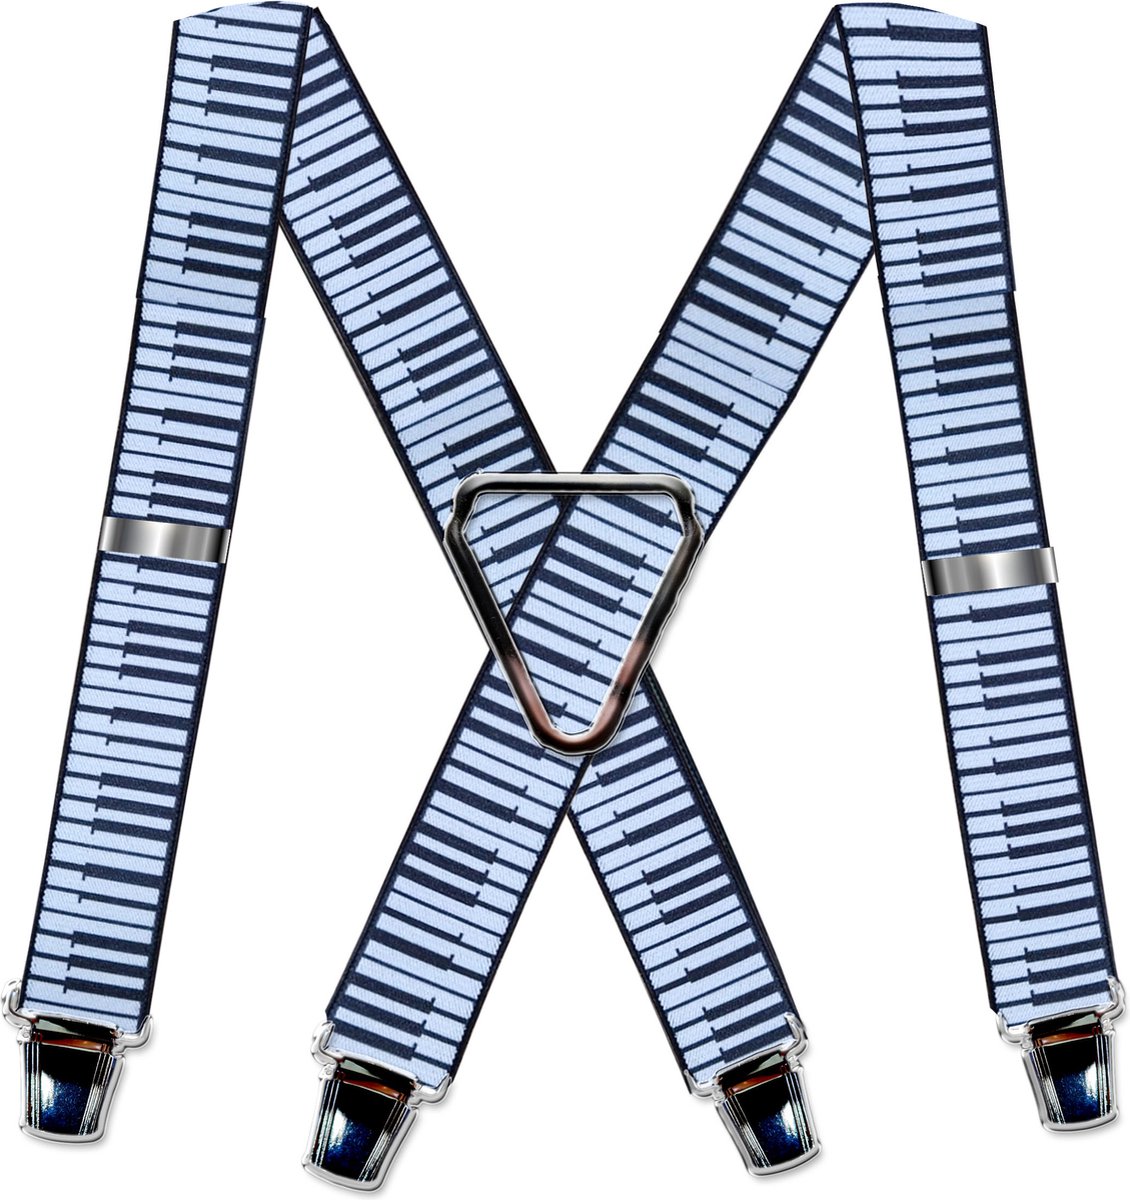 4-point suspenders 'Striped' with wide extra strong sturdy clips Piano keyboard style Color